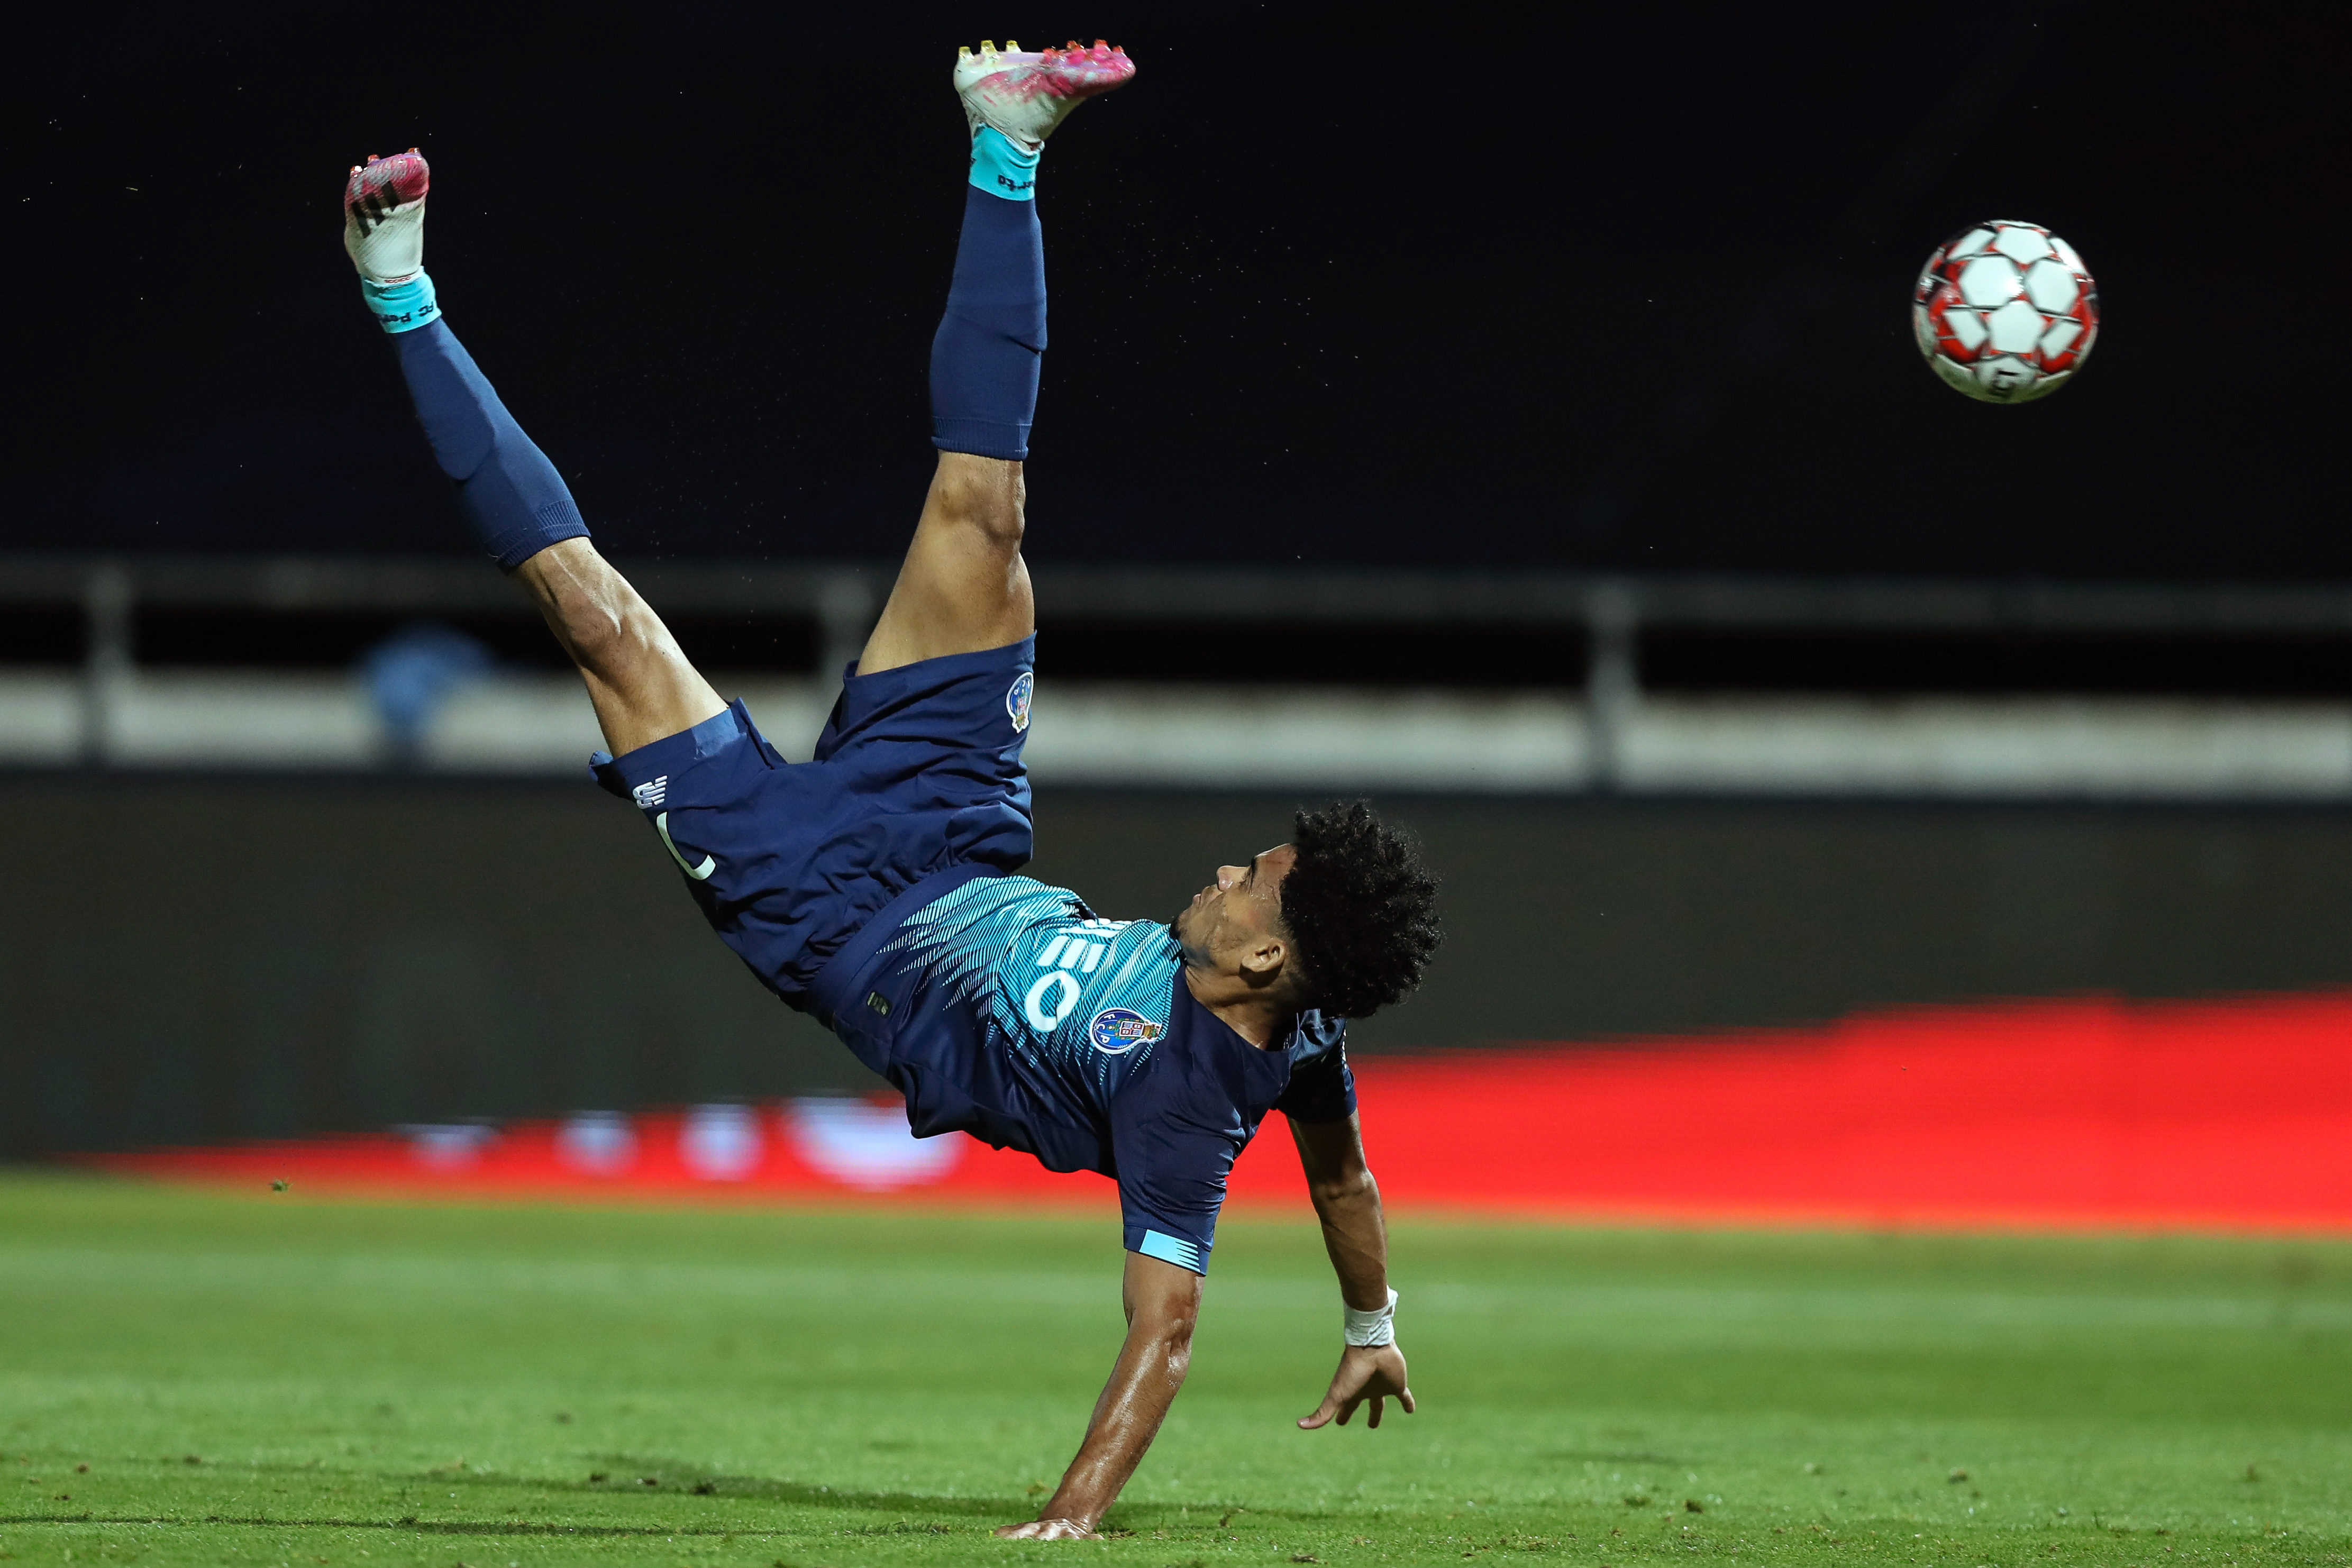 FC Porto's Colombian forward Luis Diaz jumps for the ball during the Portuguese league football match FC Famalicao against FC Porto at the Municipal Stadium in Vila Nova de Famalicao on June 03, 2020. (Photo by Jose COELHO / POOL / AFP)